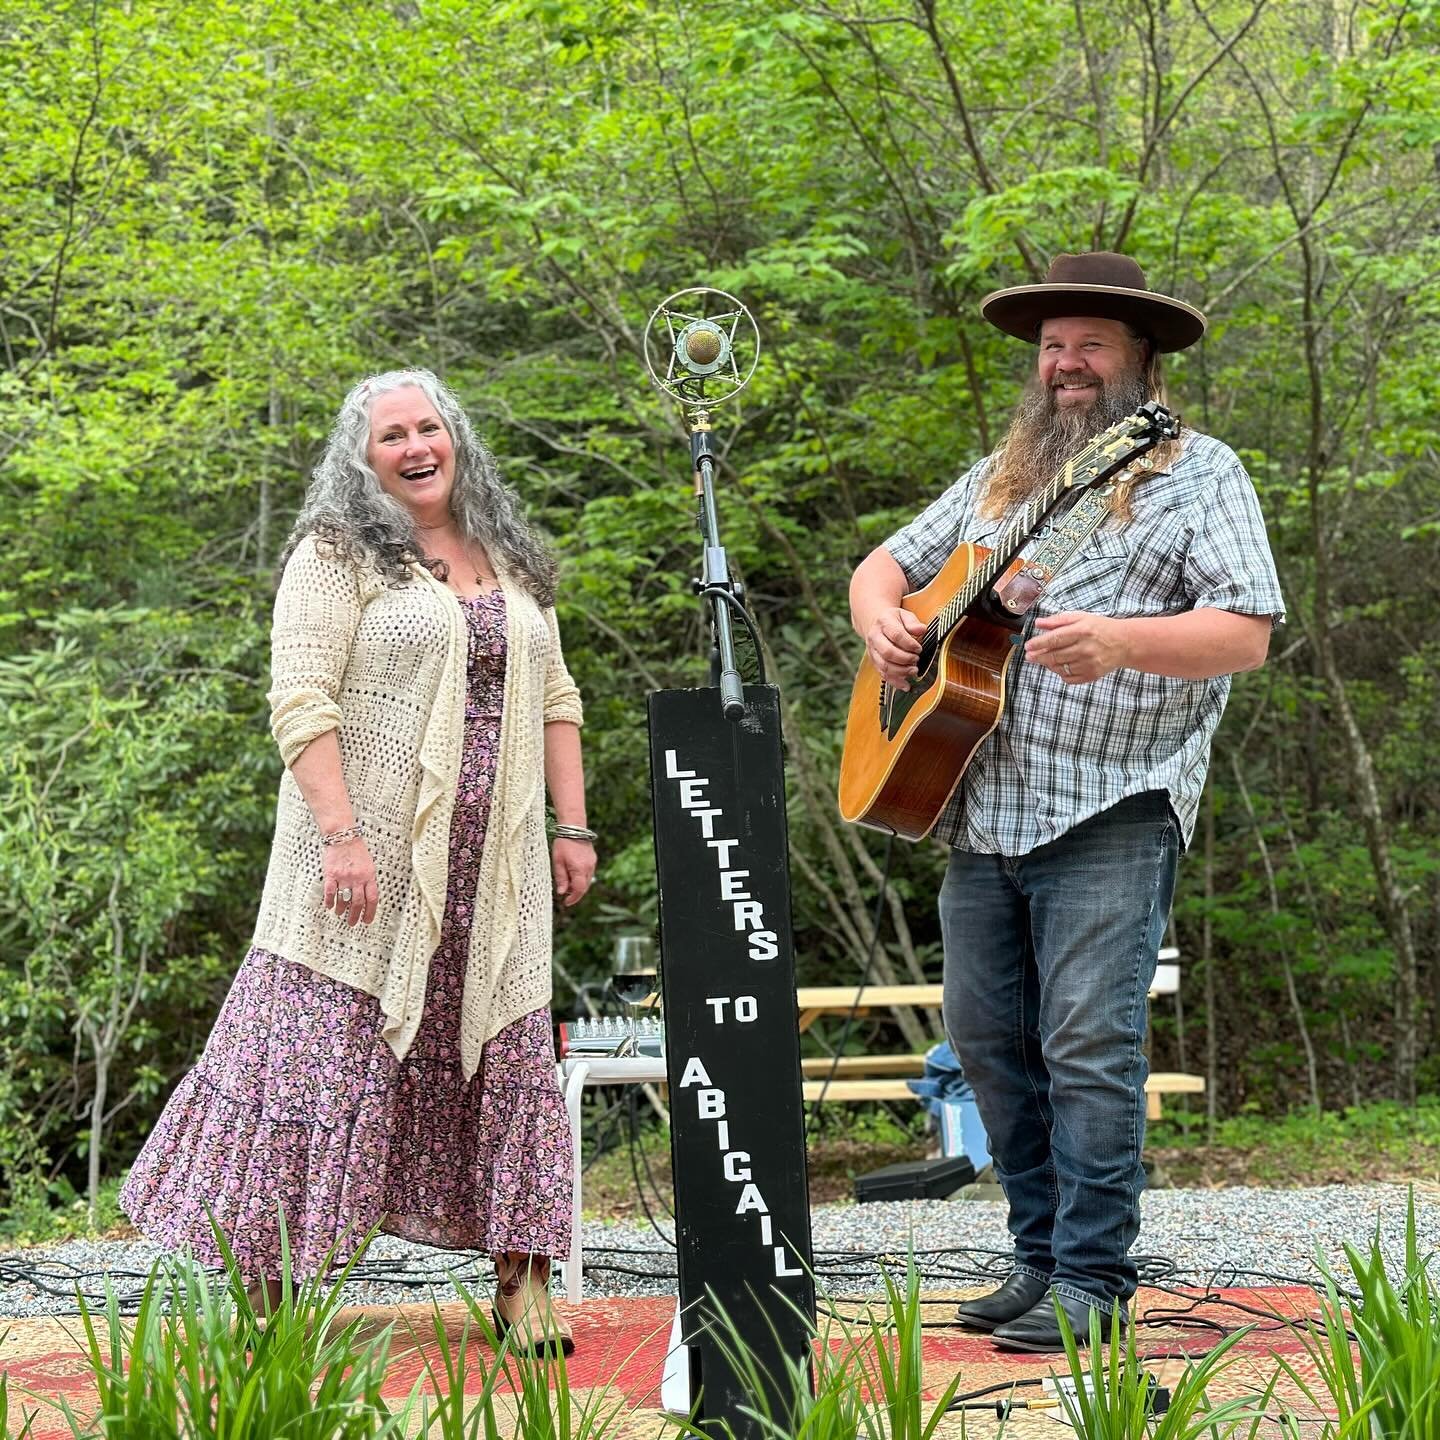 🎶🎼🎵 We have loved the return of LIVE MUSIC at Grey Hawk! Be sure to join us Saturday and Sunday for some amazing sets from Angela Easterling and Jadon Pace &amp; Meghan Woods. And we&rsquo;re open tonight until 9! #wncmusic #lakeluremusic #lakelur